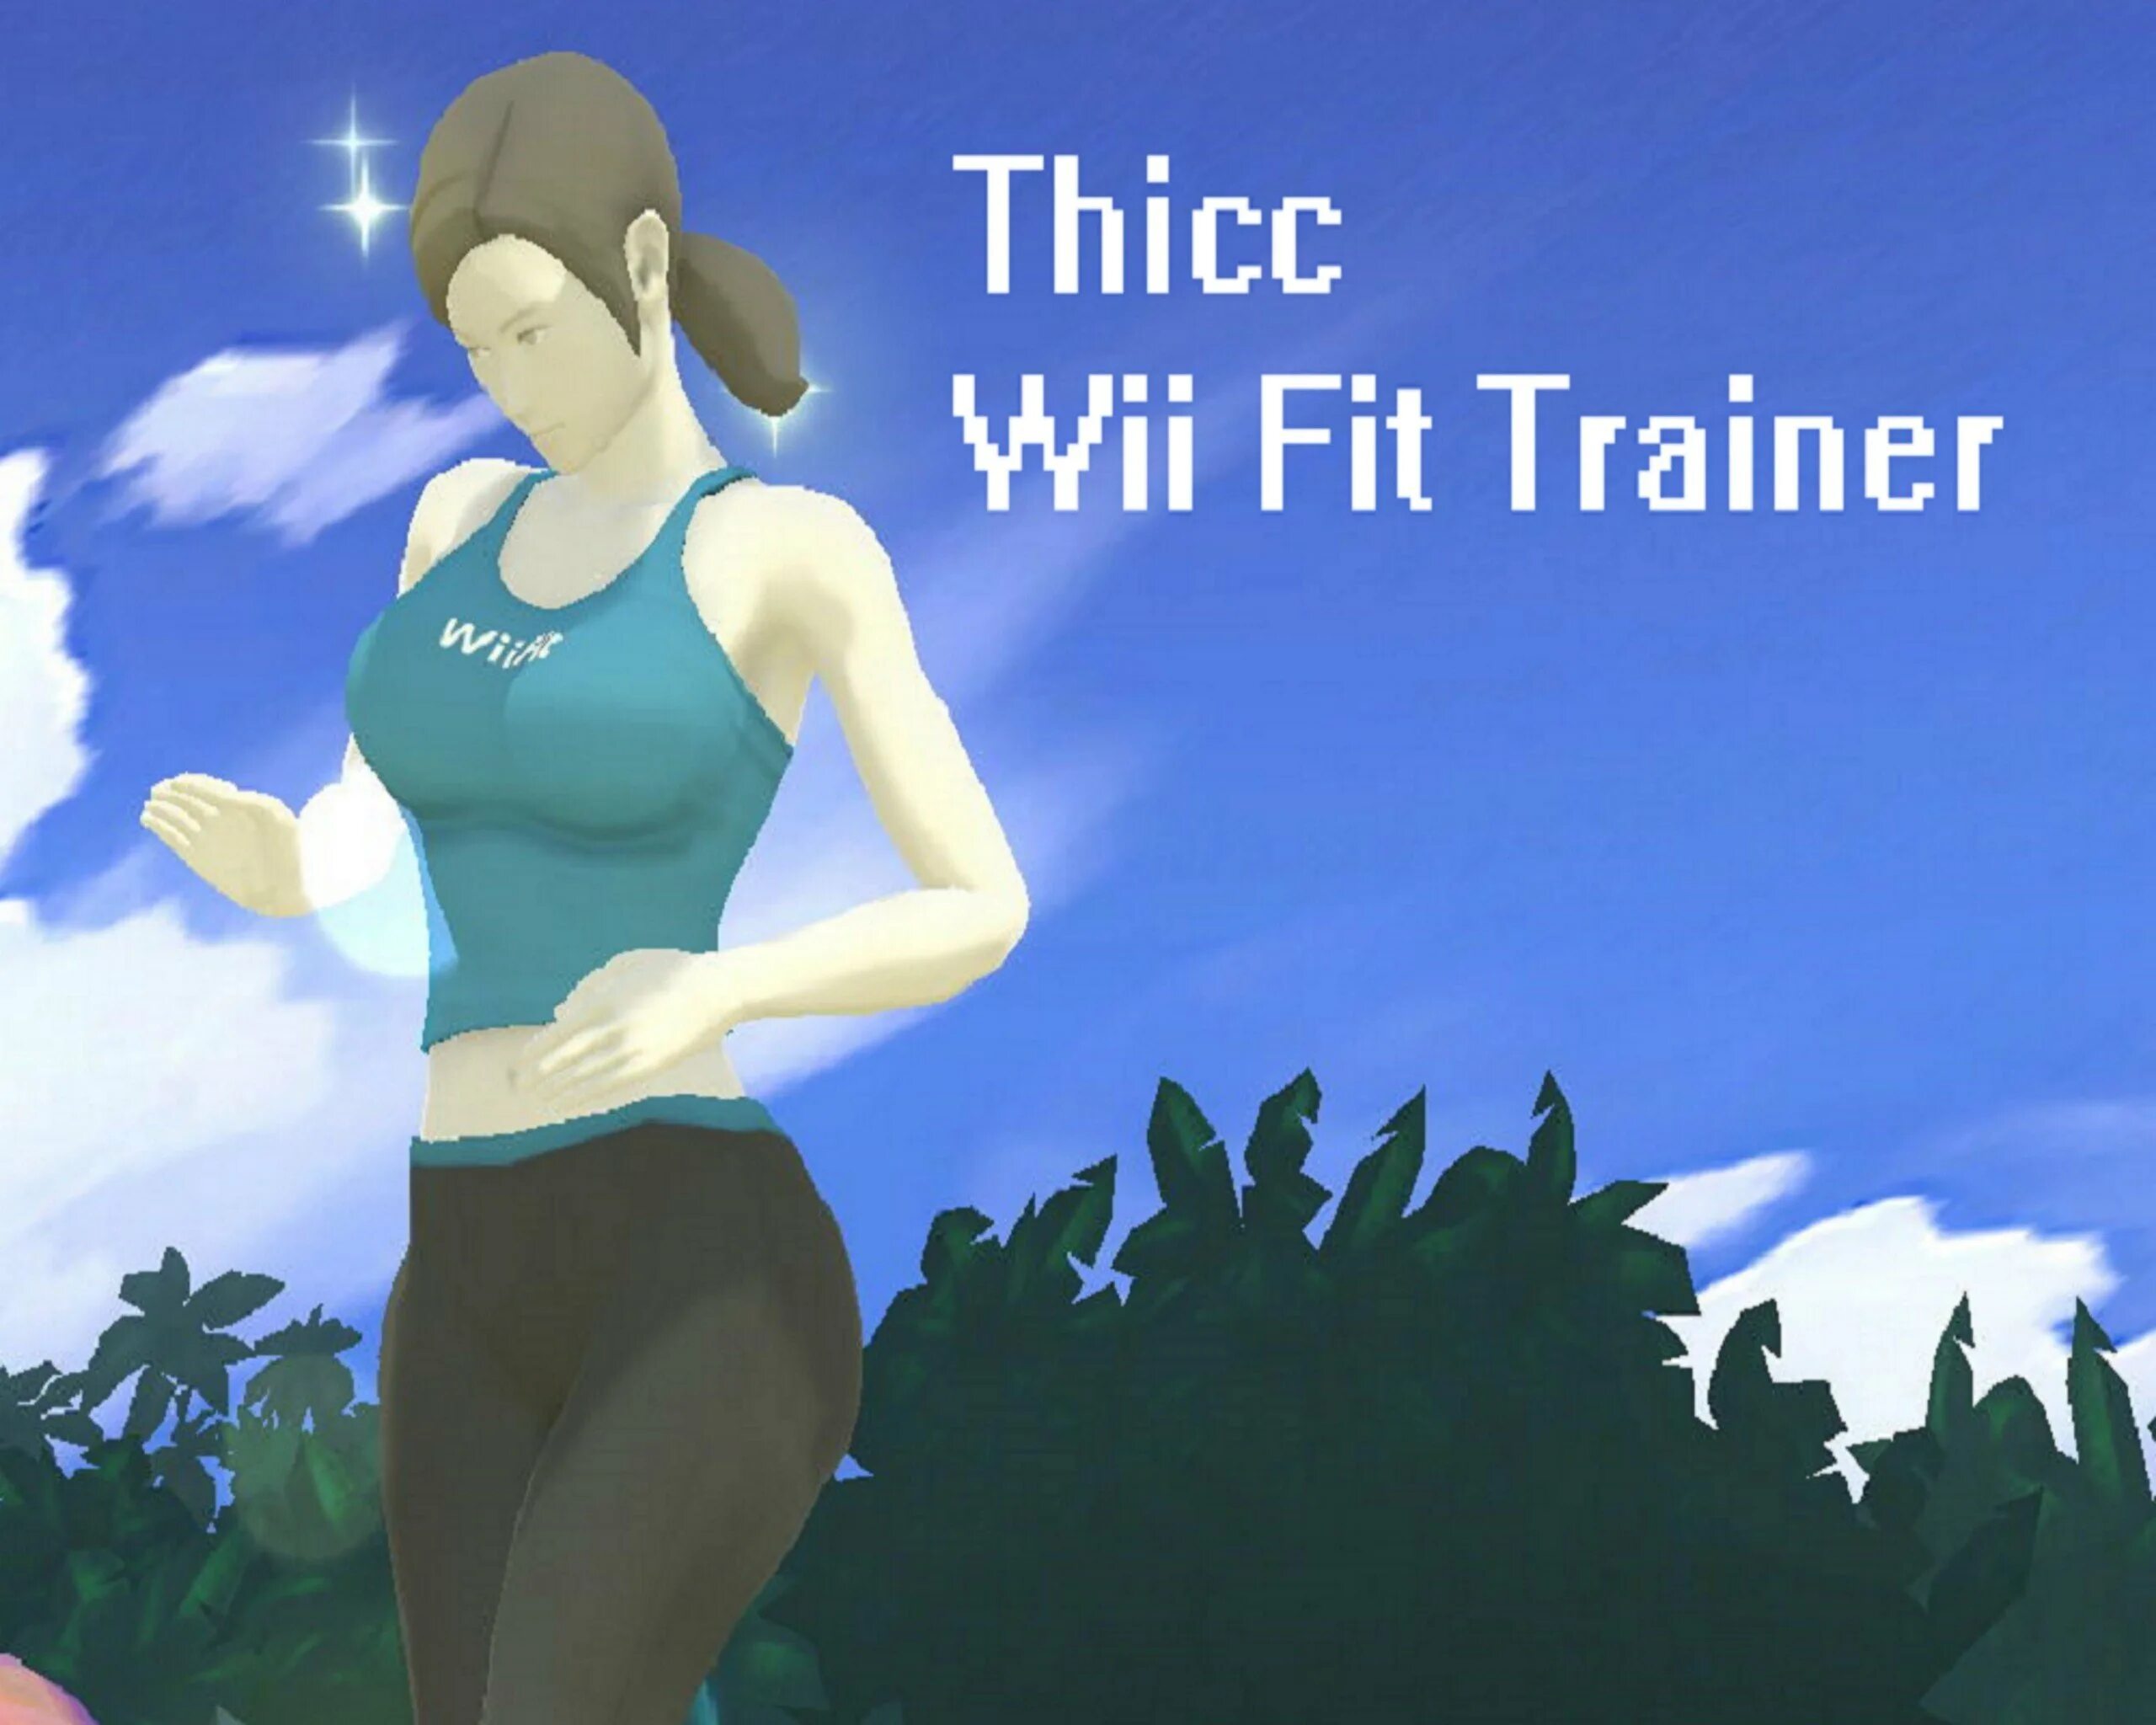 Wii fit. Wii Fit тренер. Wii Fit Trainer super Smash. Wii Fit Trainer 34. Wii Fit Trainer 18.